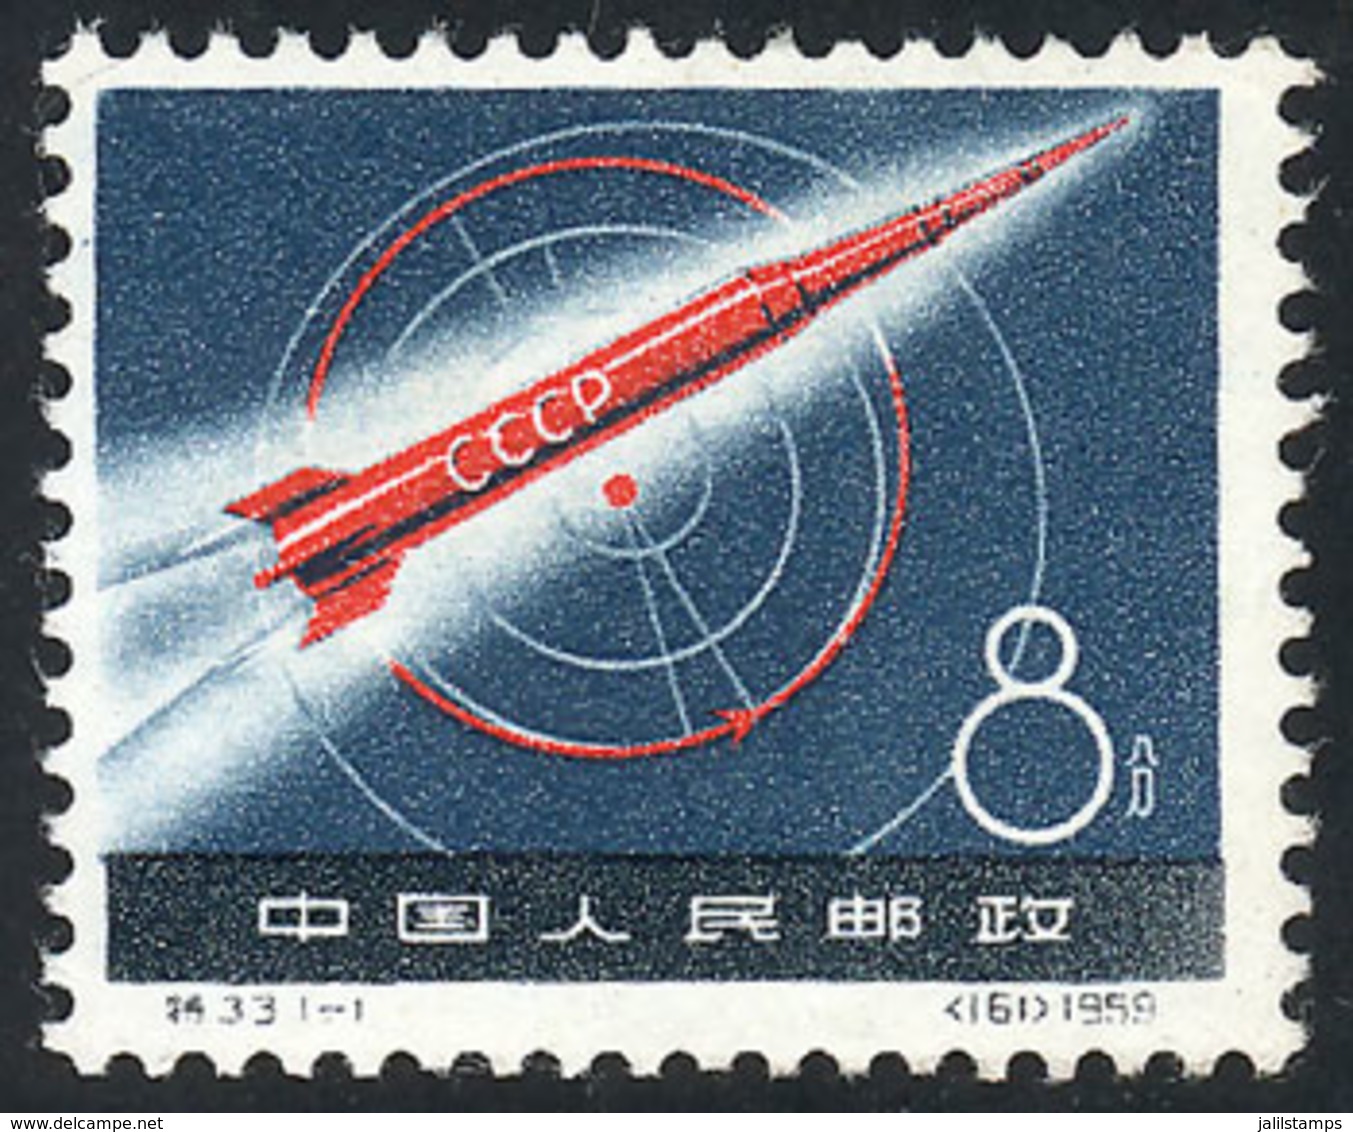 CHINA: Sc.425, 1959 Launch Of First Russian Space Rocket, MNH (issued Without Gum), Excellent Quality! - Used Stamps